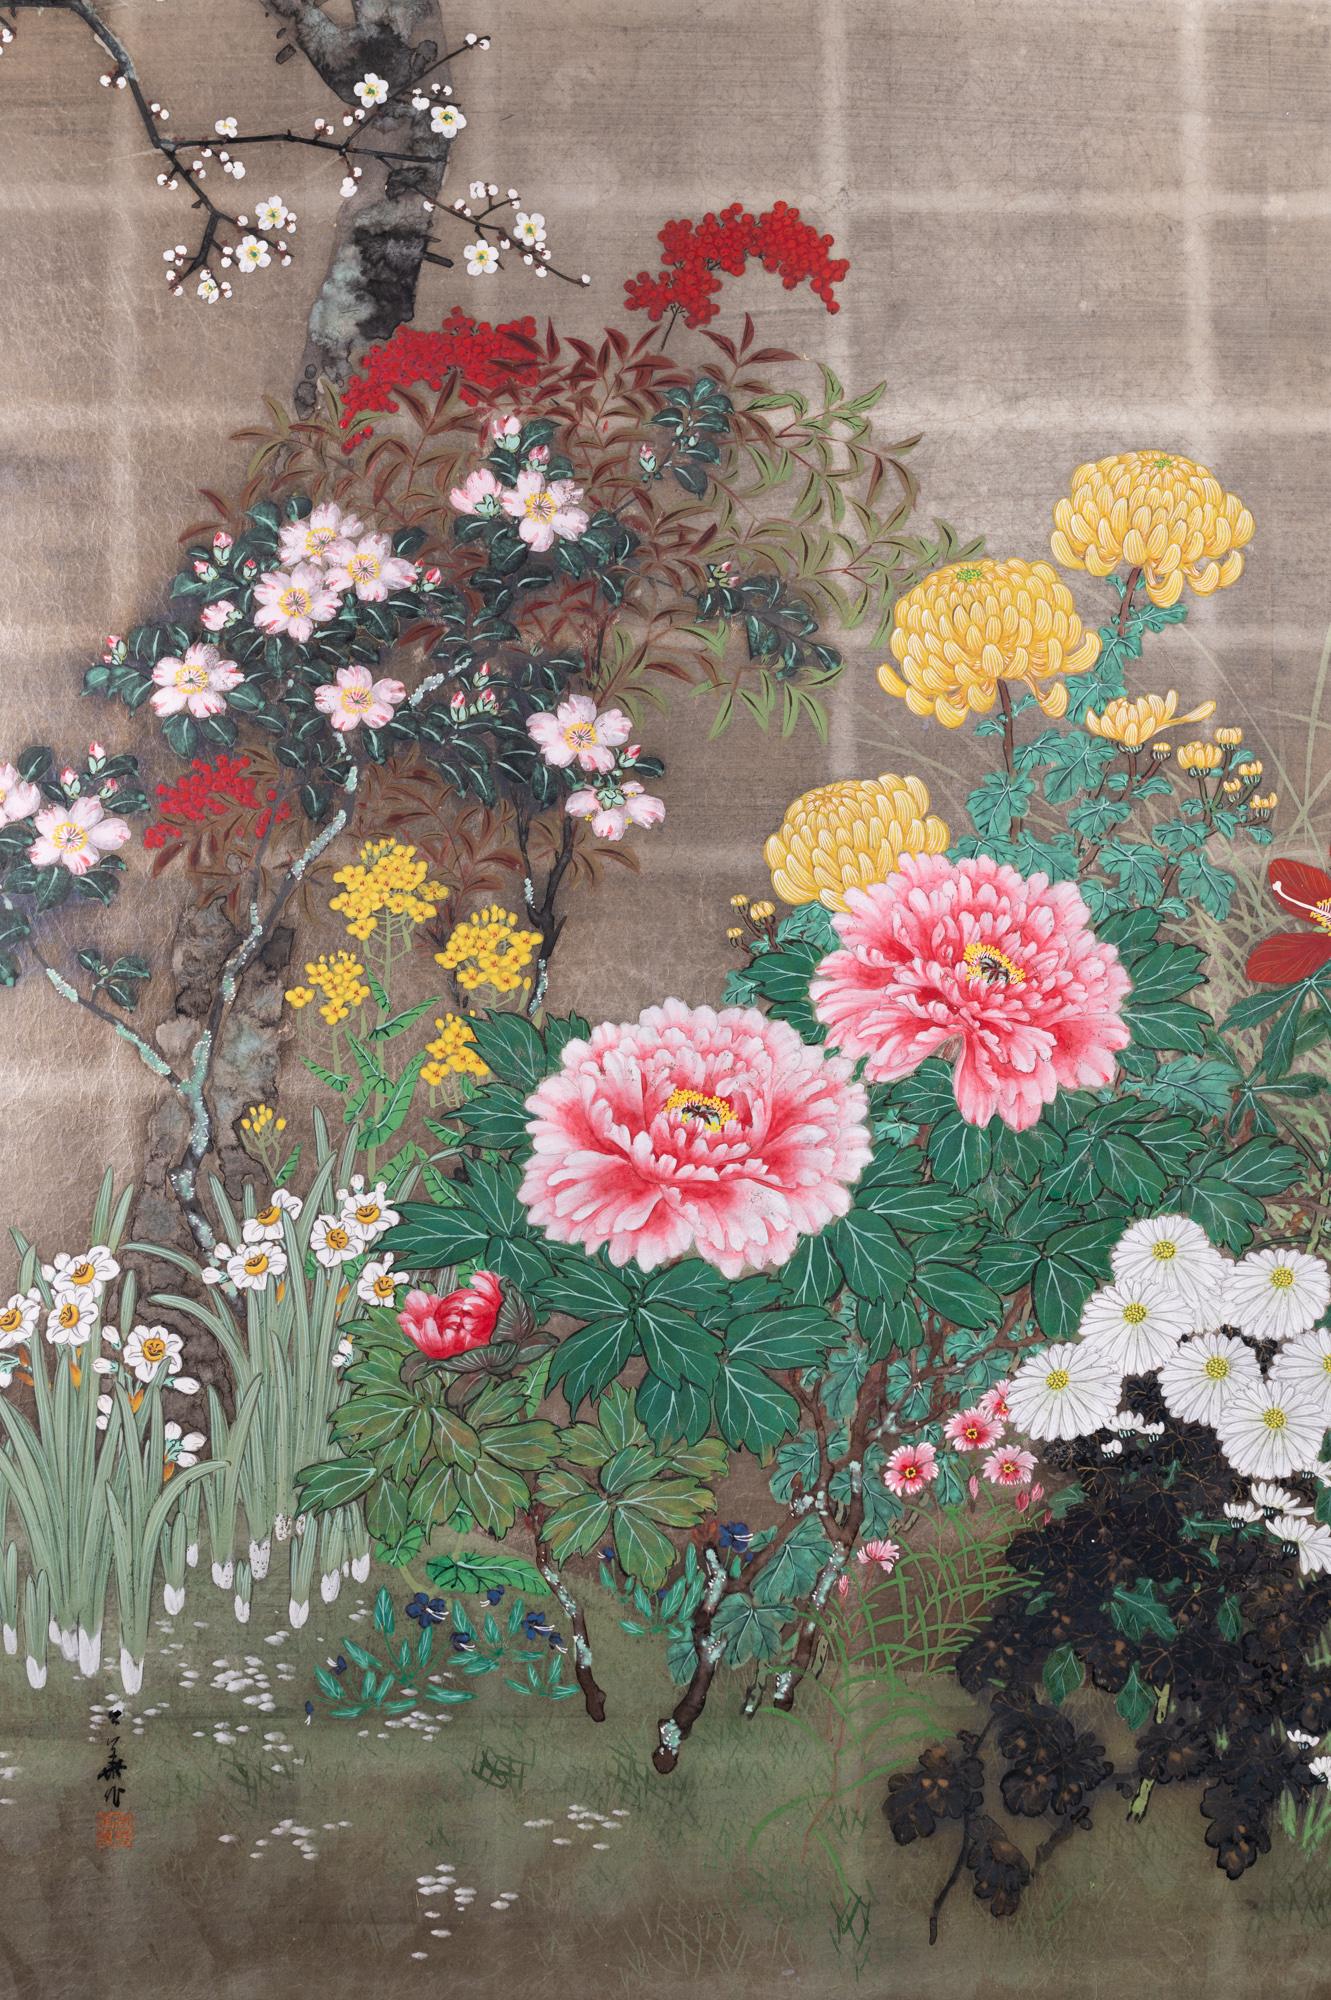 Flowers including peonies, dahlias, irises, and bellflowers bloom underneath a blossoming cherry tree and provide cover for a pair of quail. The structure of this garden almost resembles an English style garden. Mineral pigments on mulberry paper